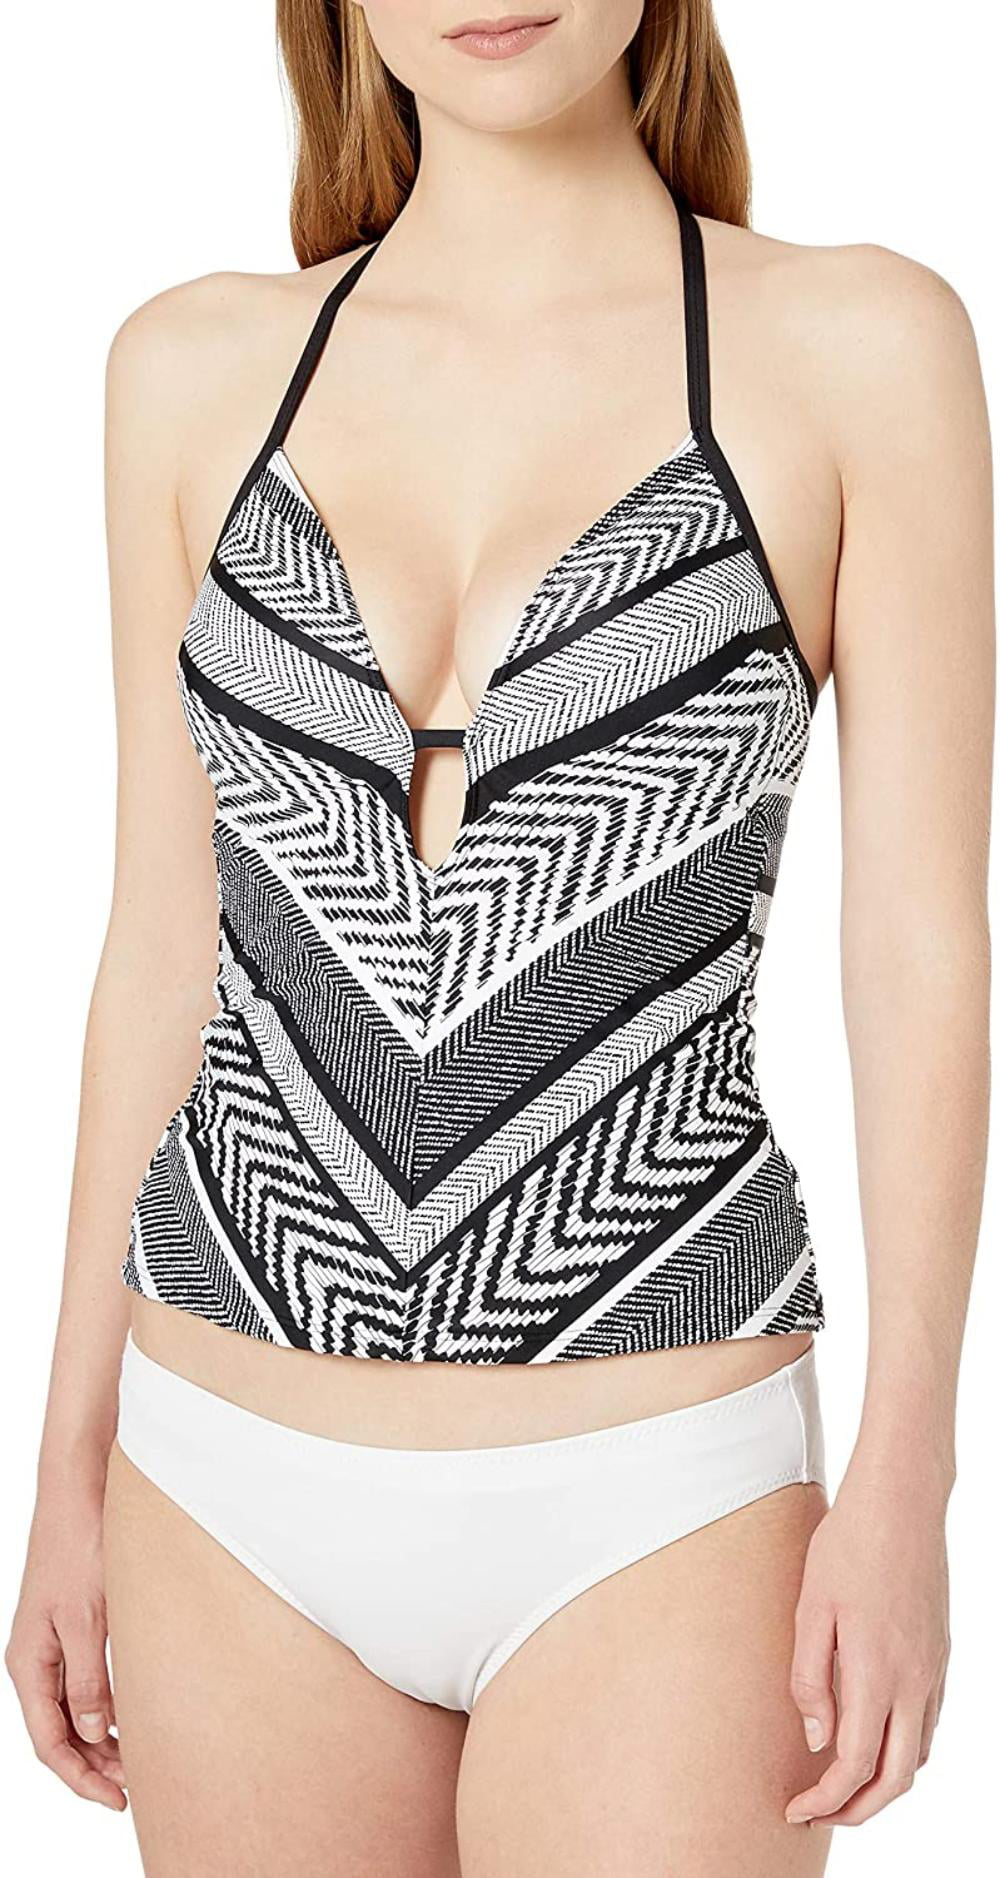 Kenneth Cole New York Womens High Neck Tankini Swimsuit Top